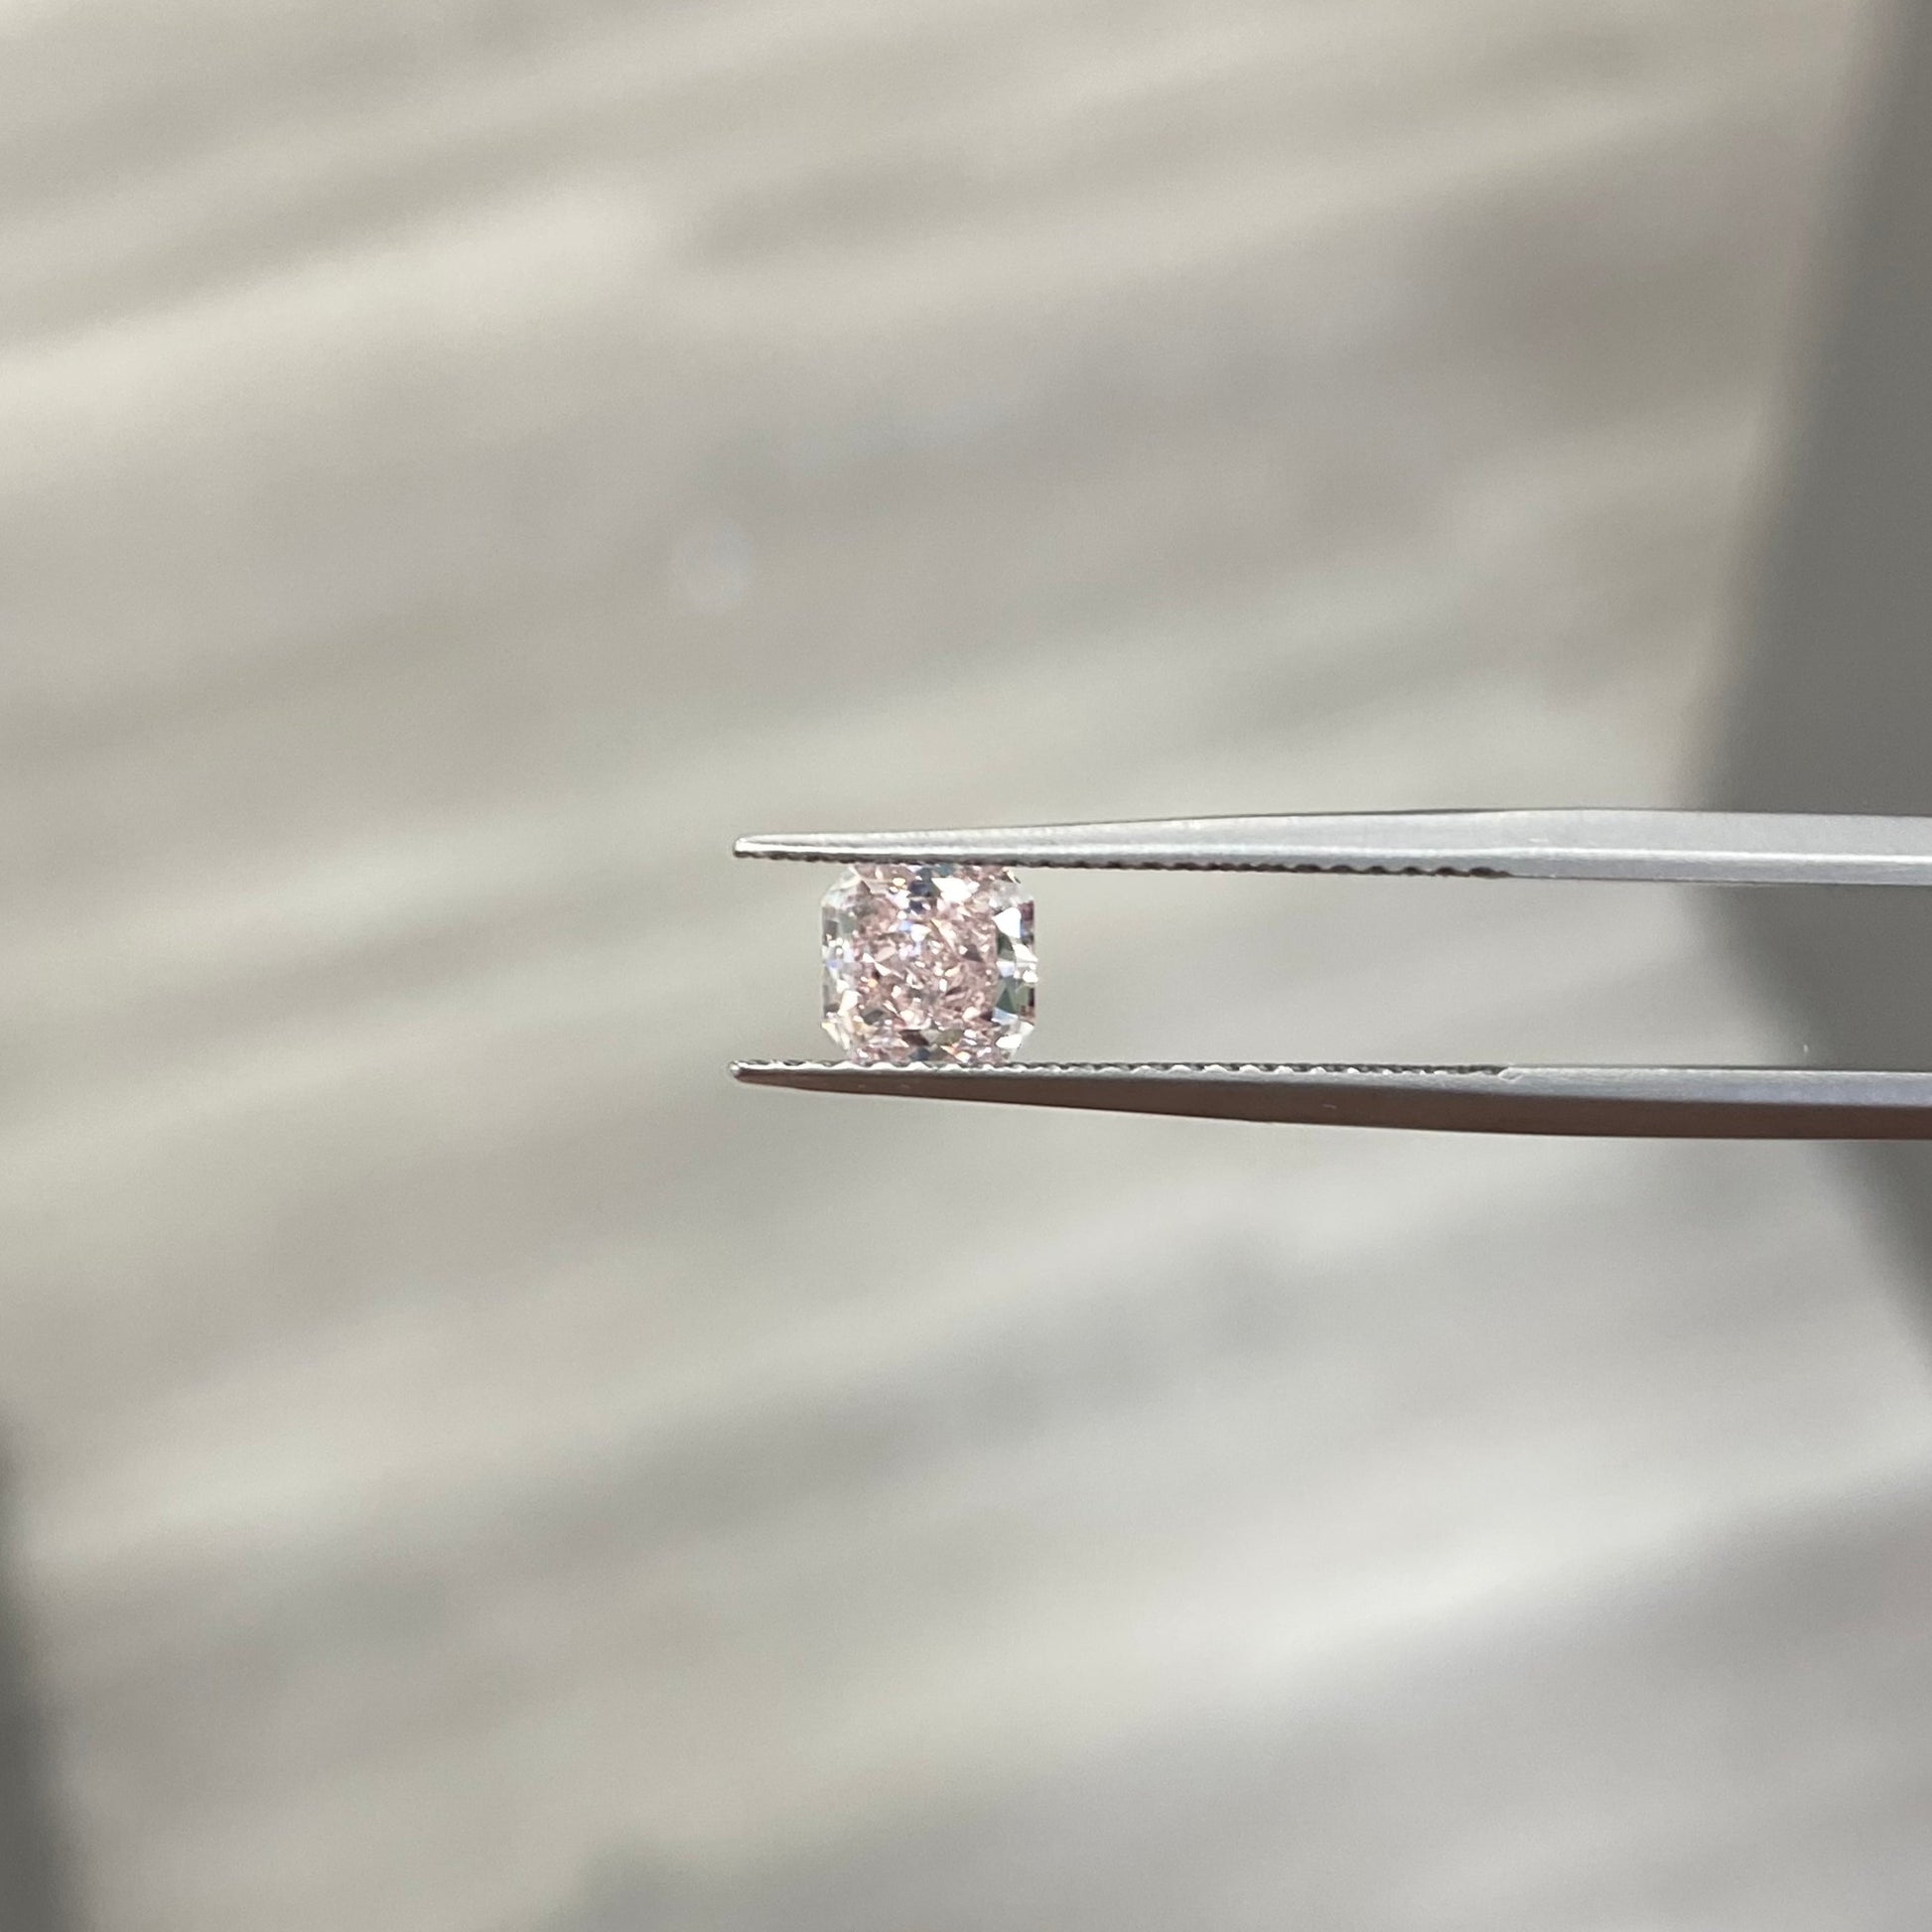 affordable pink diamond. light pink. light pink diamond. GIA pink diamond. fancy light pink. VVS1. EX EX none. fancy colored diamond.